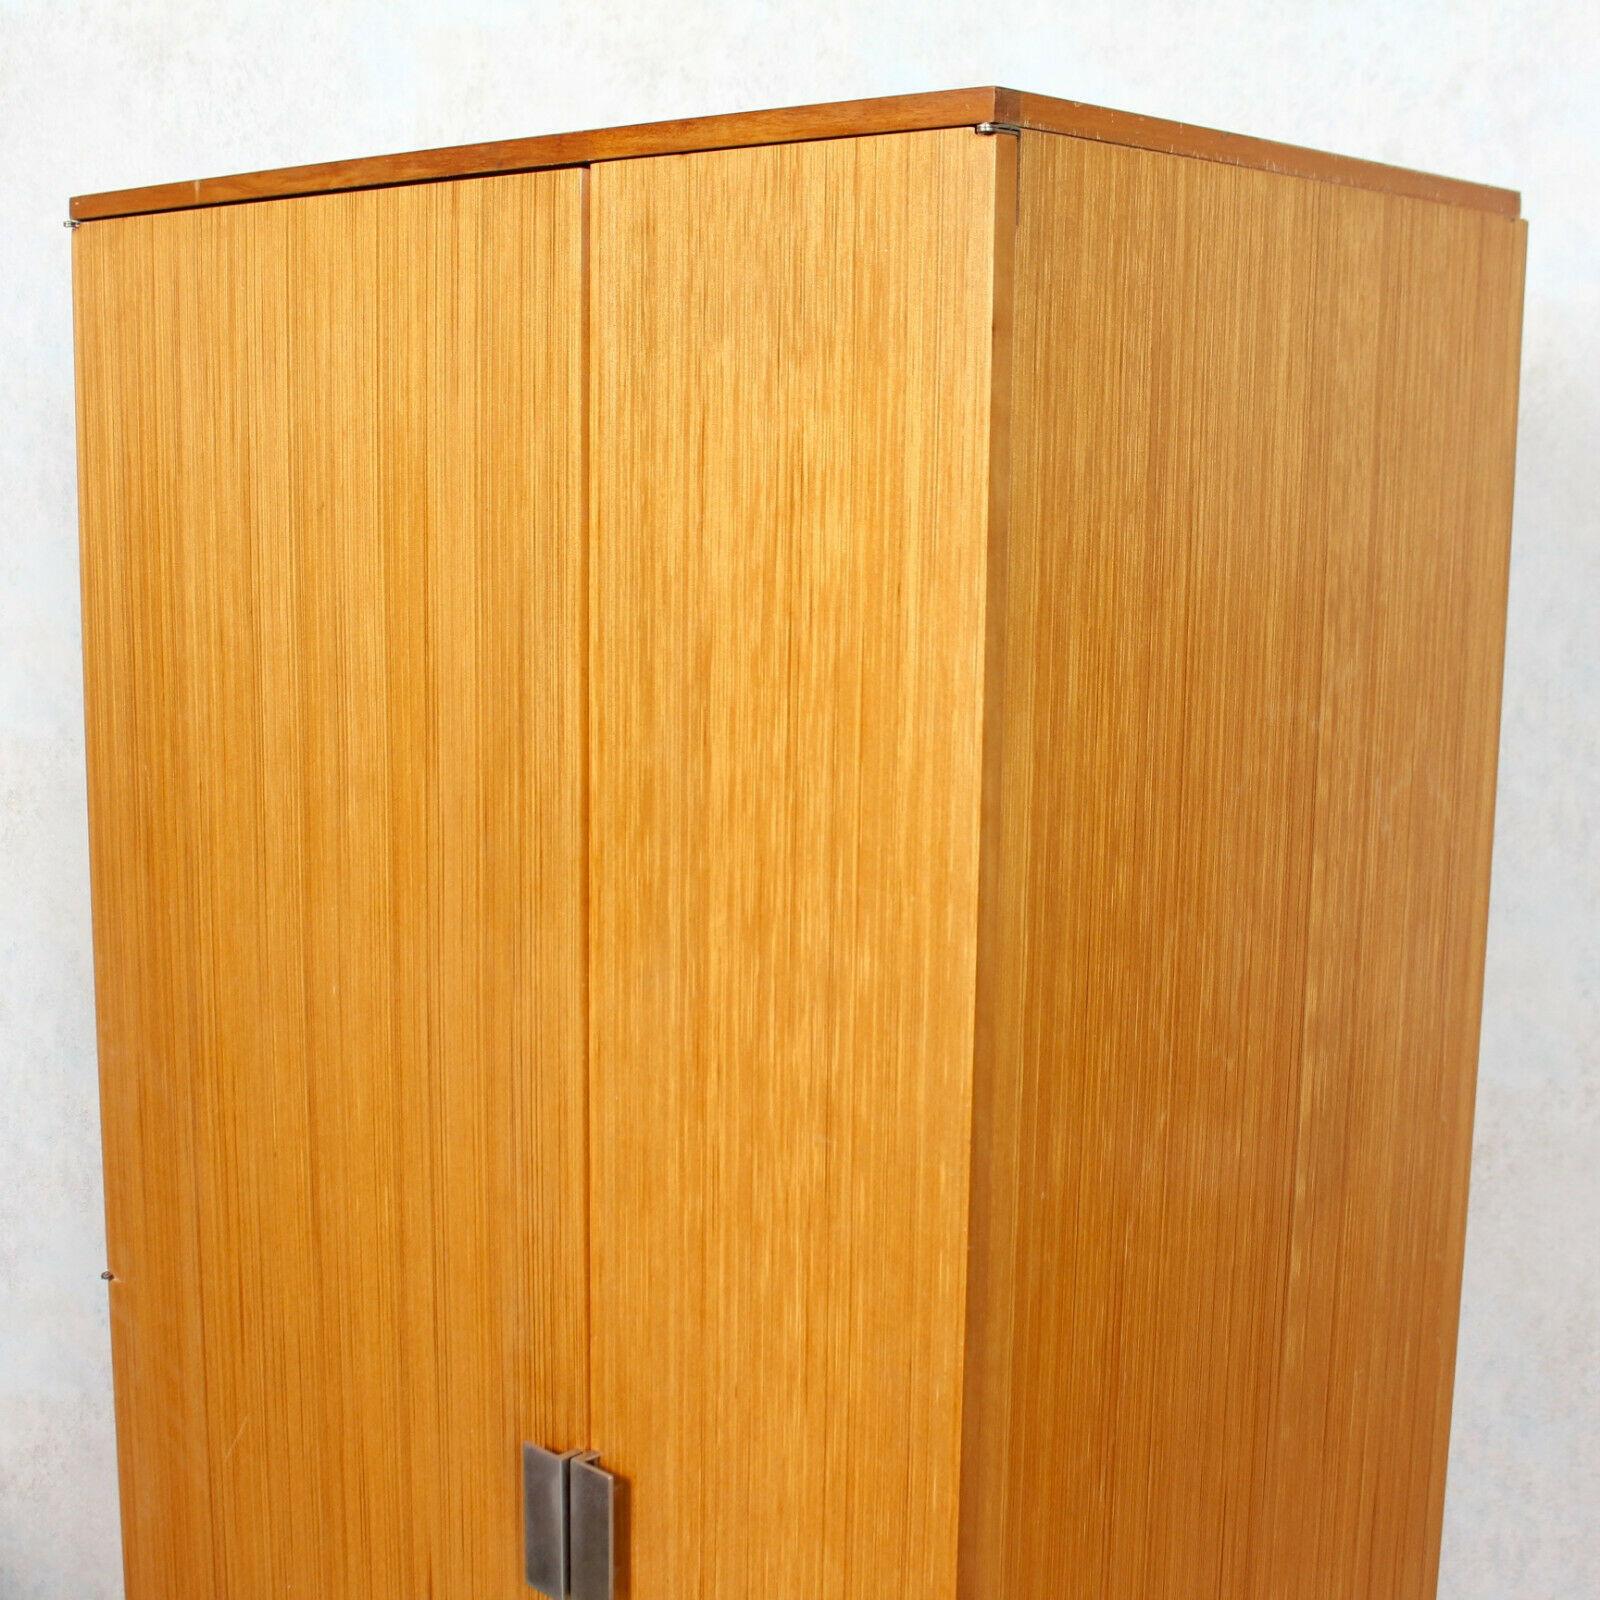 English Stag Wardrobe Retro Gents Compactum In Good Condition For Sale In Newcastle upon Tyne, GB